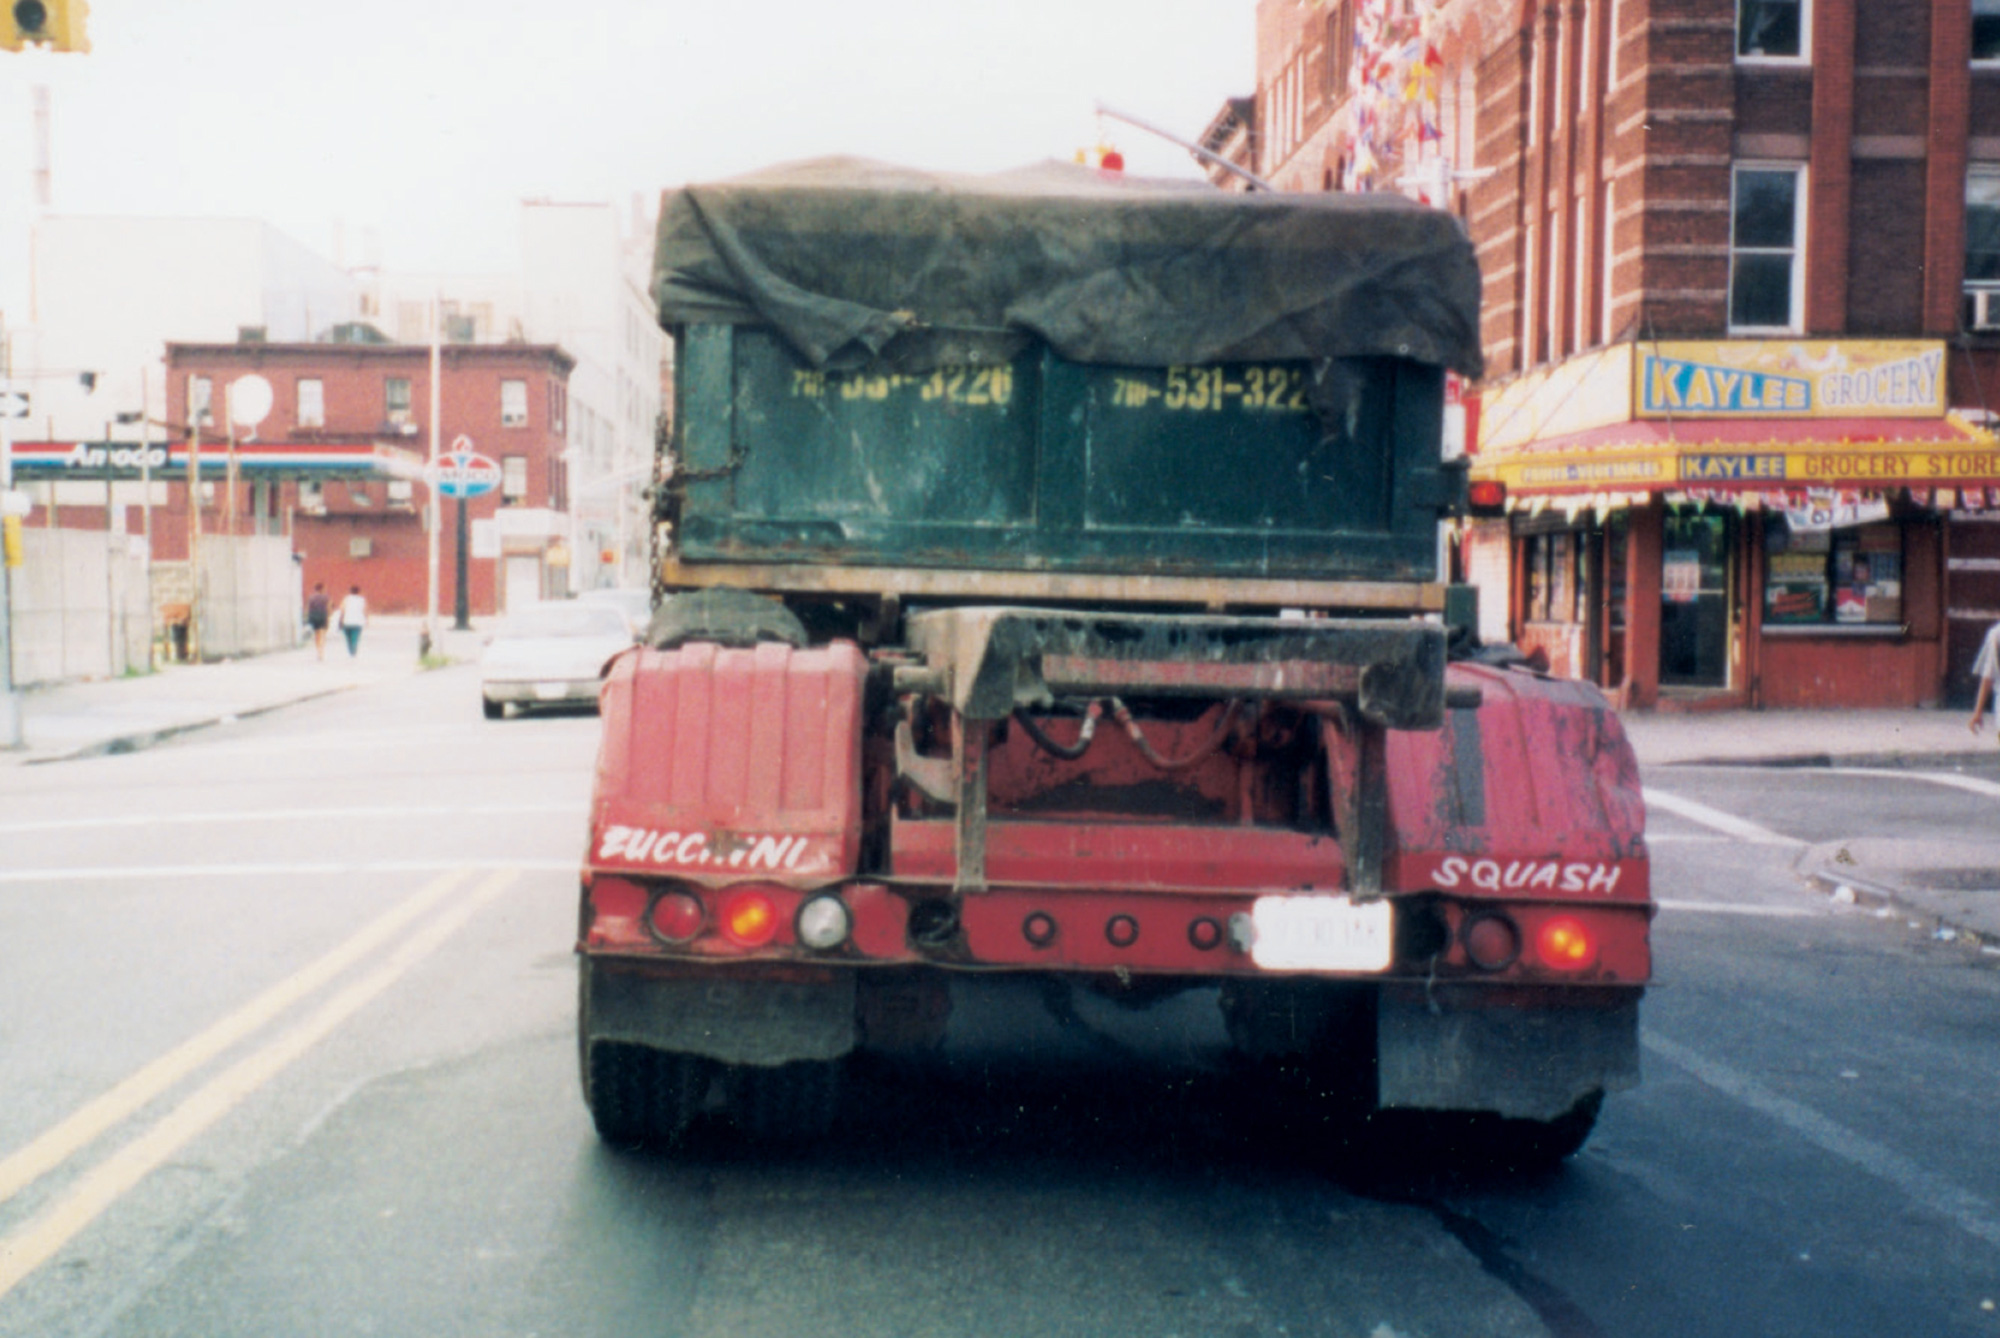 A photo by Joseph Fratesi of the back of a truck with the word 